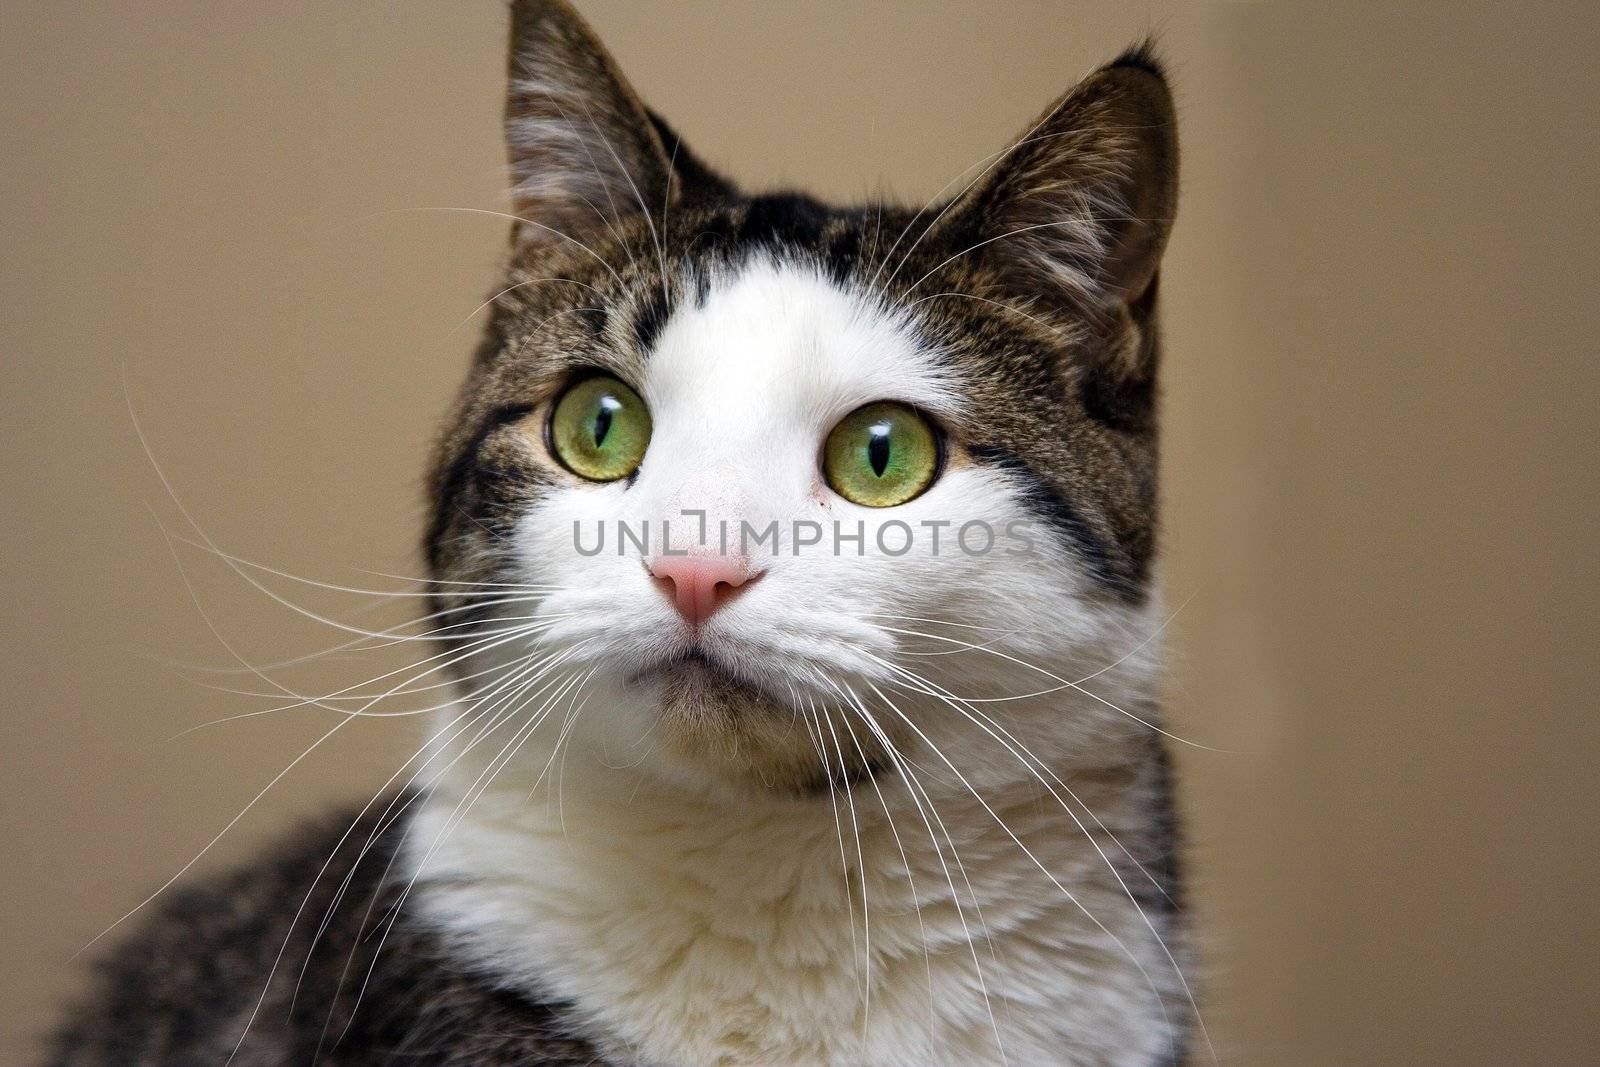 Tabby with white cat and bright green with yellow eyes looking. Head shot on beige like background